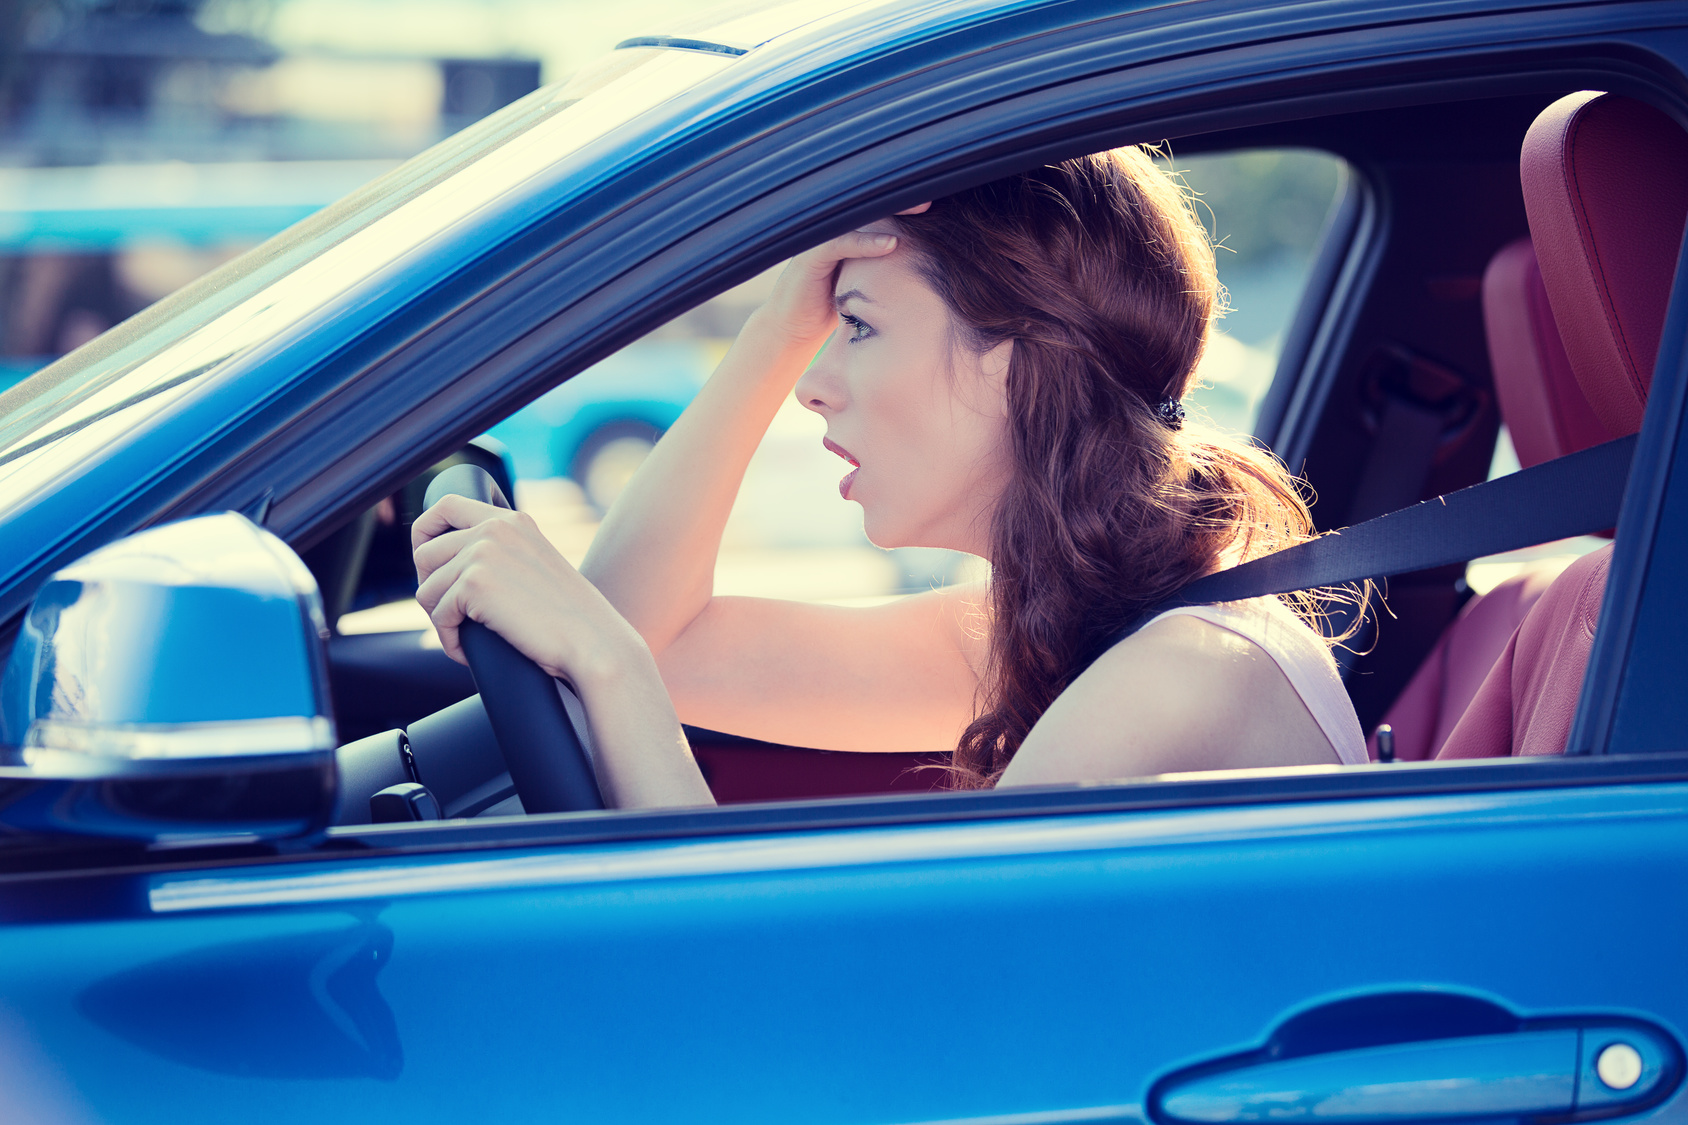 How to Handle the Emotional Impact of an Auto Accident